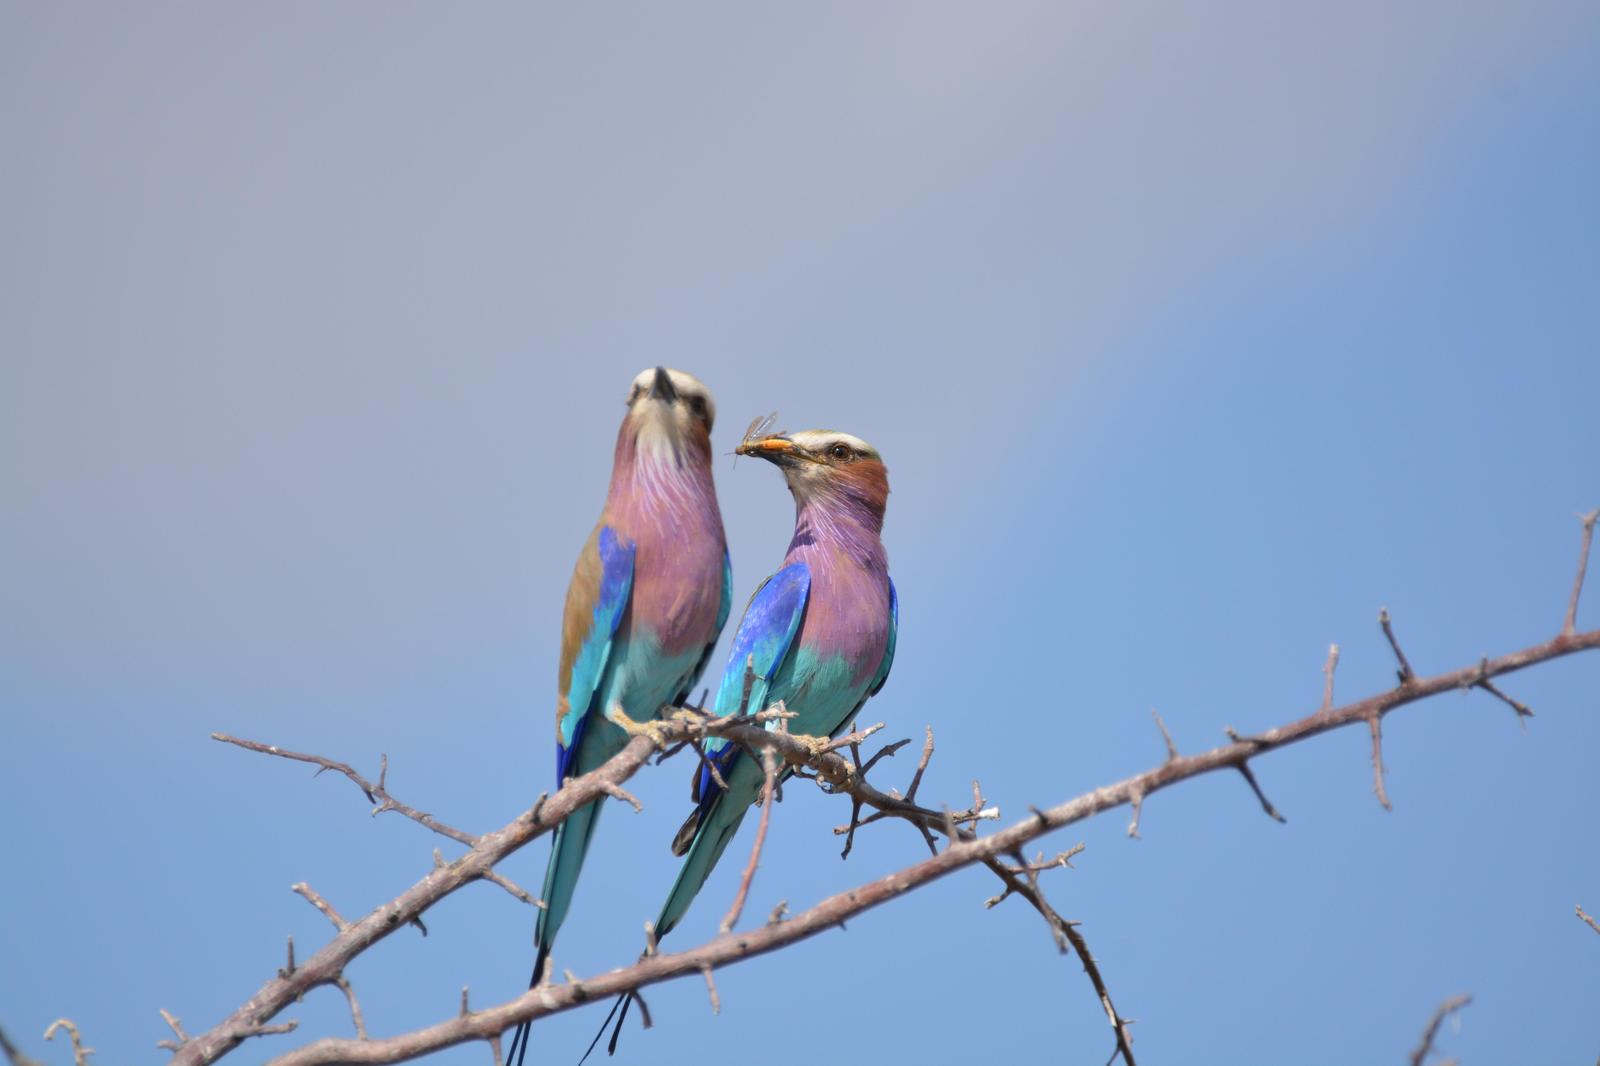 Lilac-breasted Roller Photo by Vicky Marella